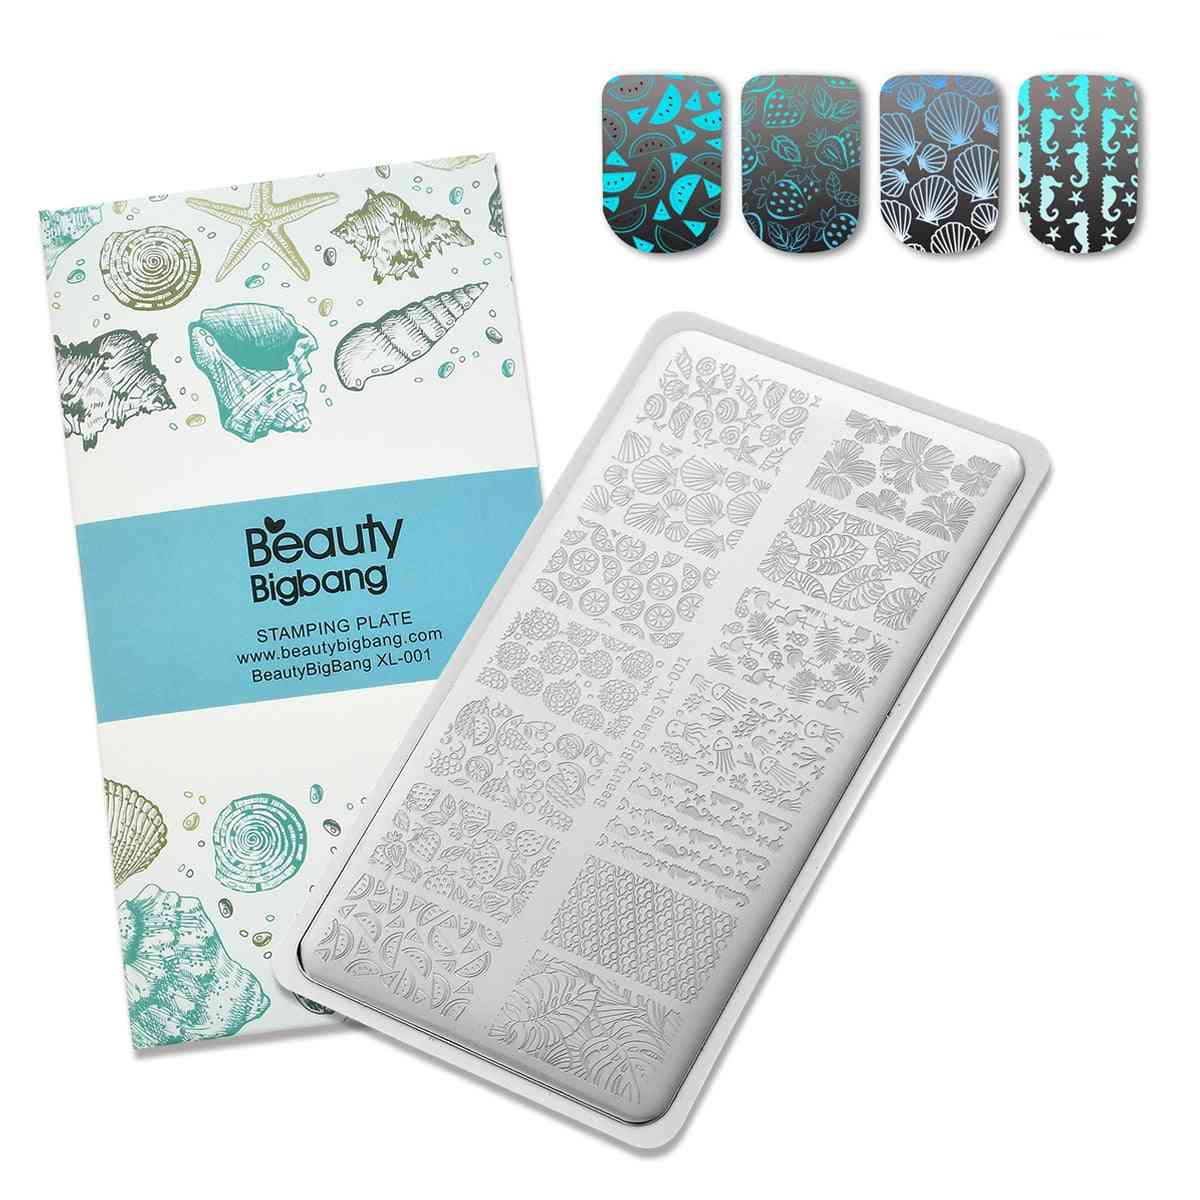 Stainless Steel Nail Stamping For Nails Polish - Fruit Image Template